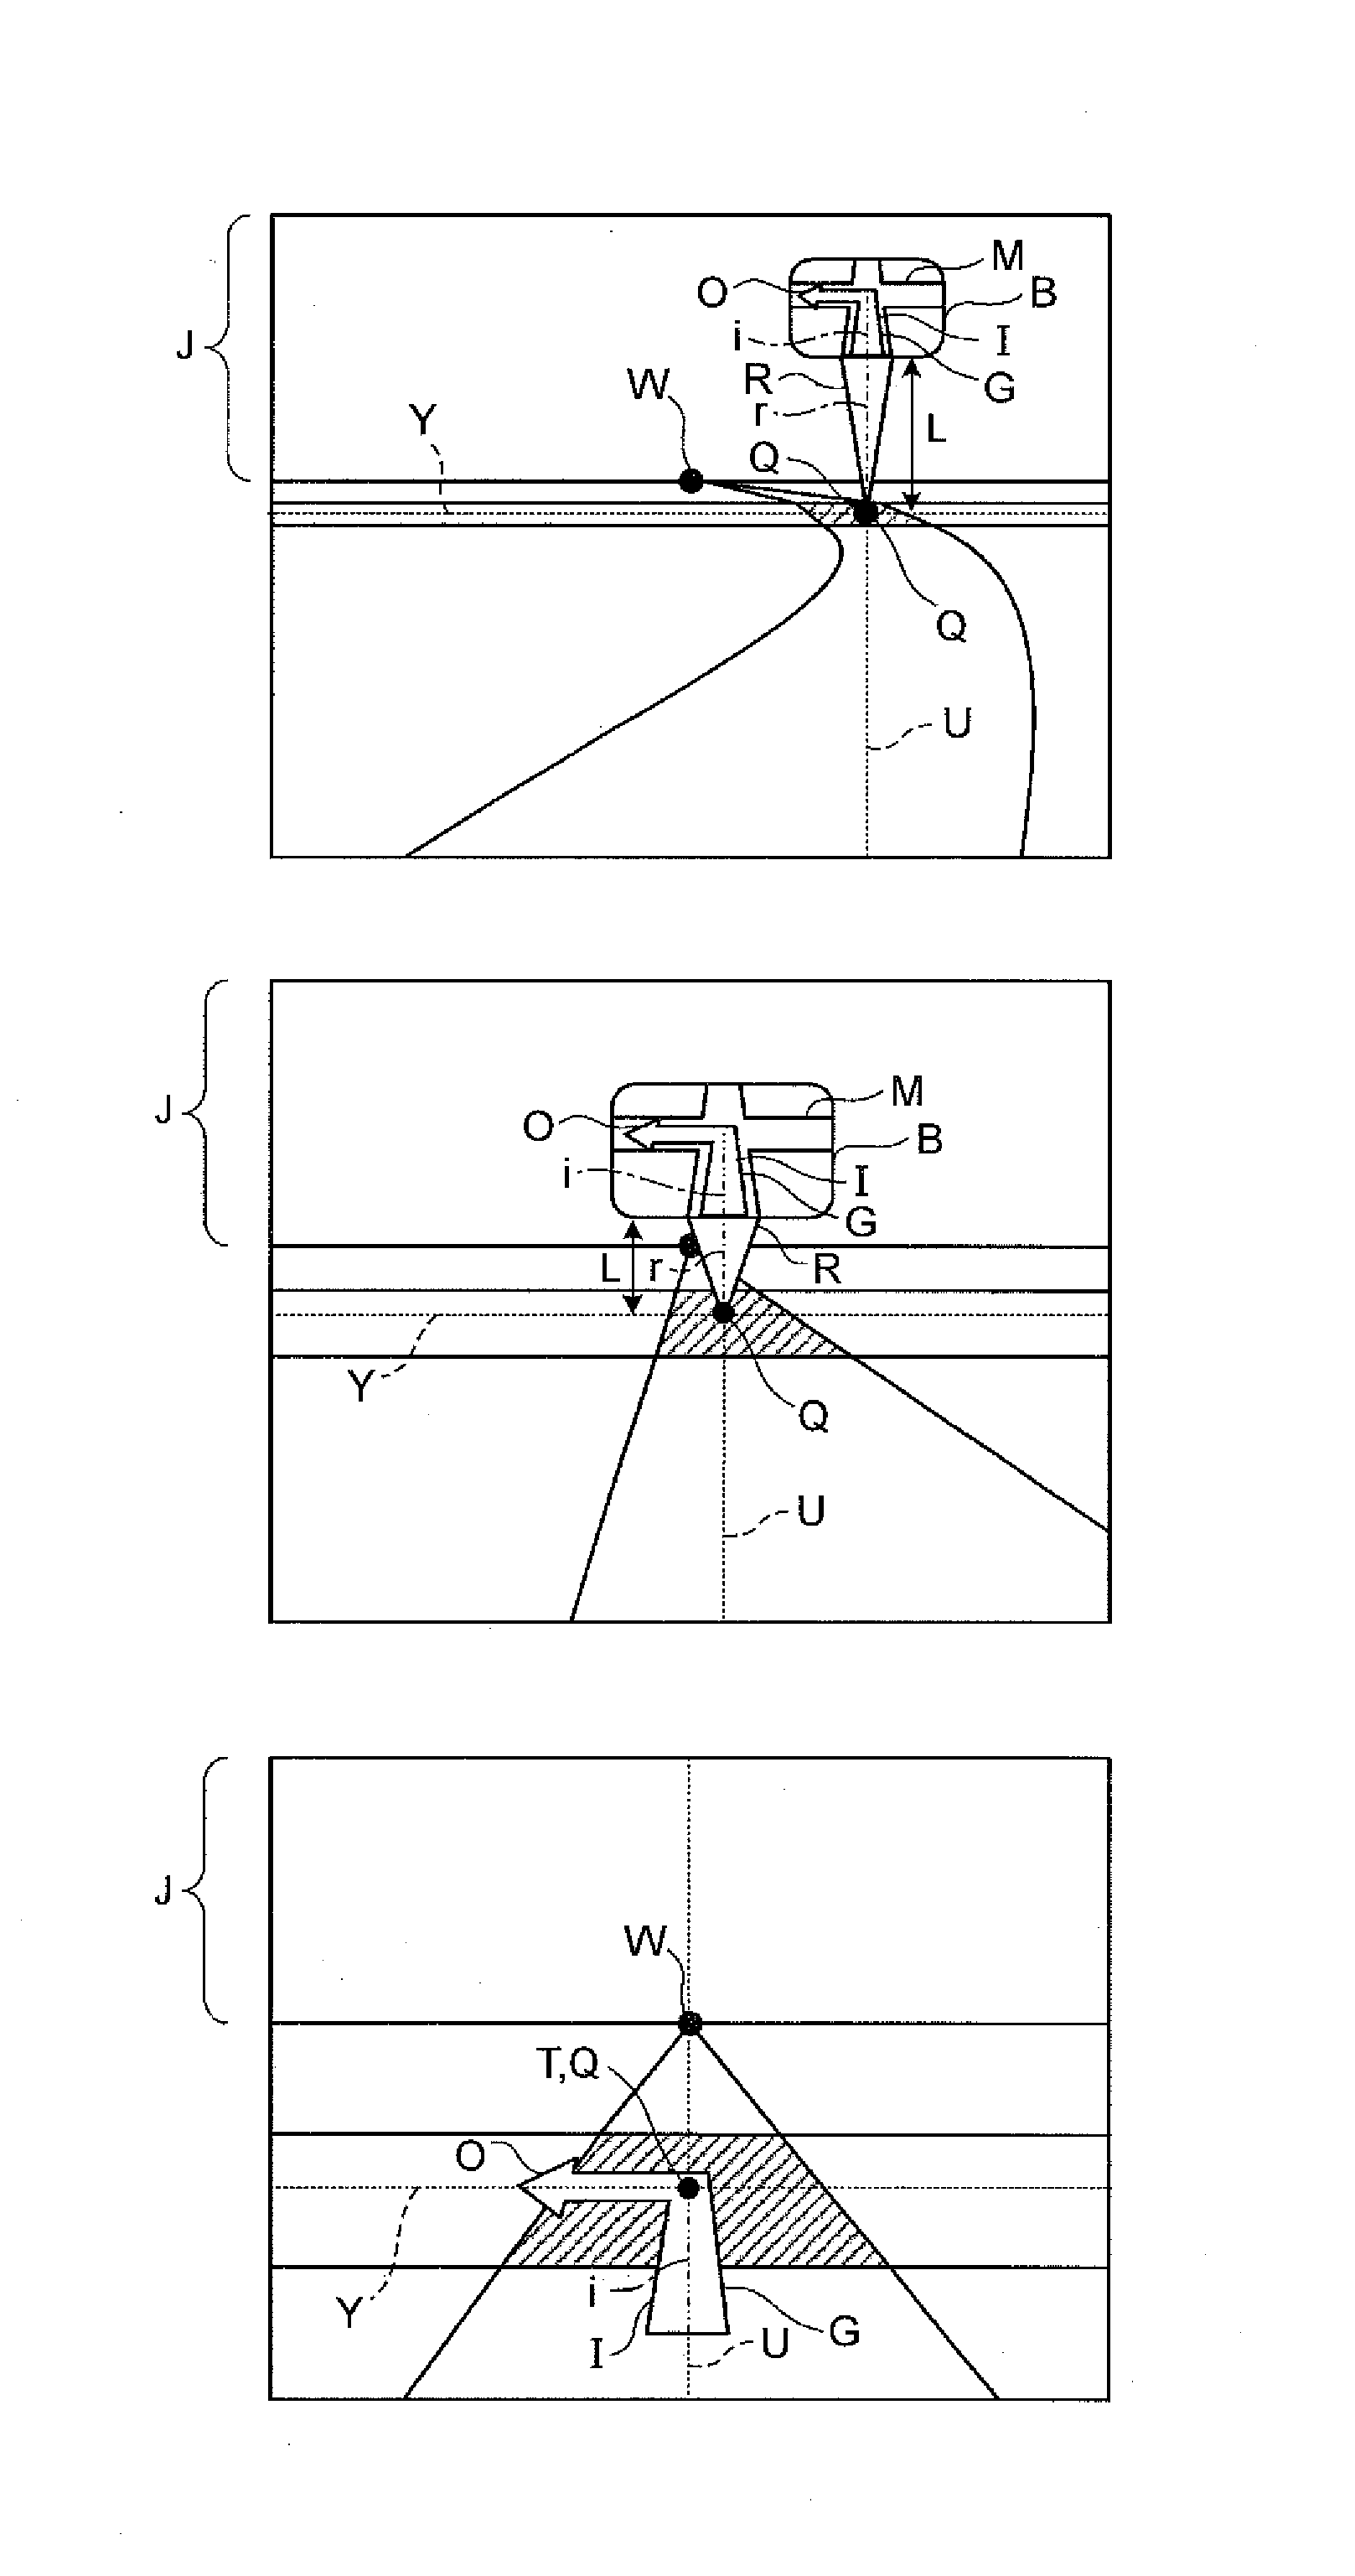 Intersection guide system, method, and program